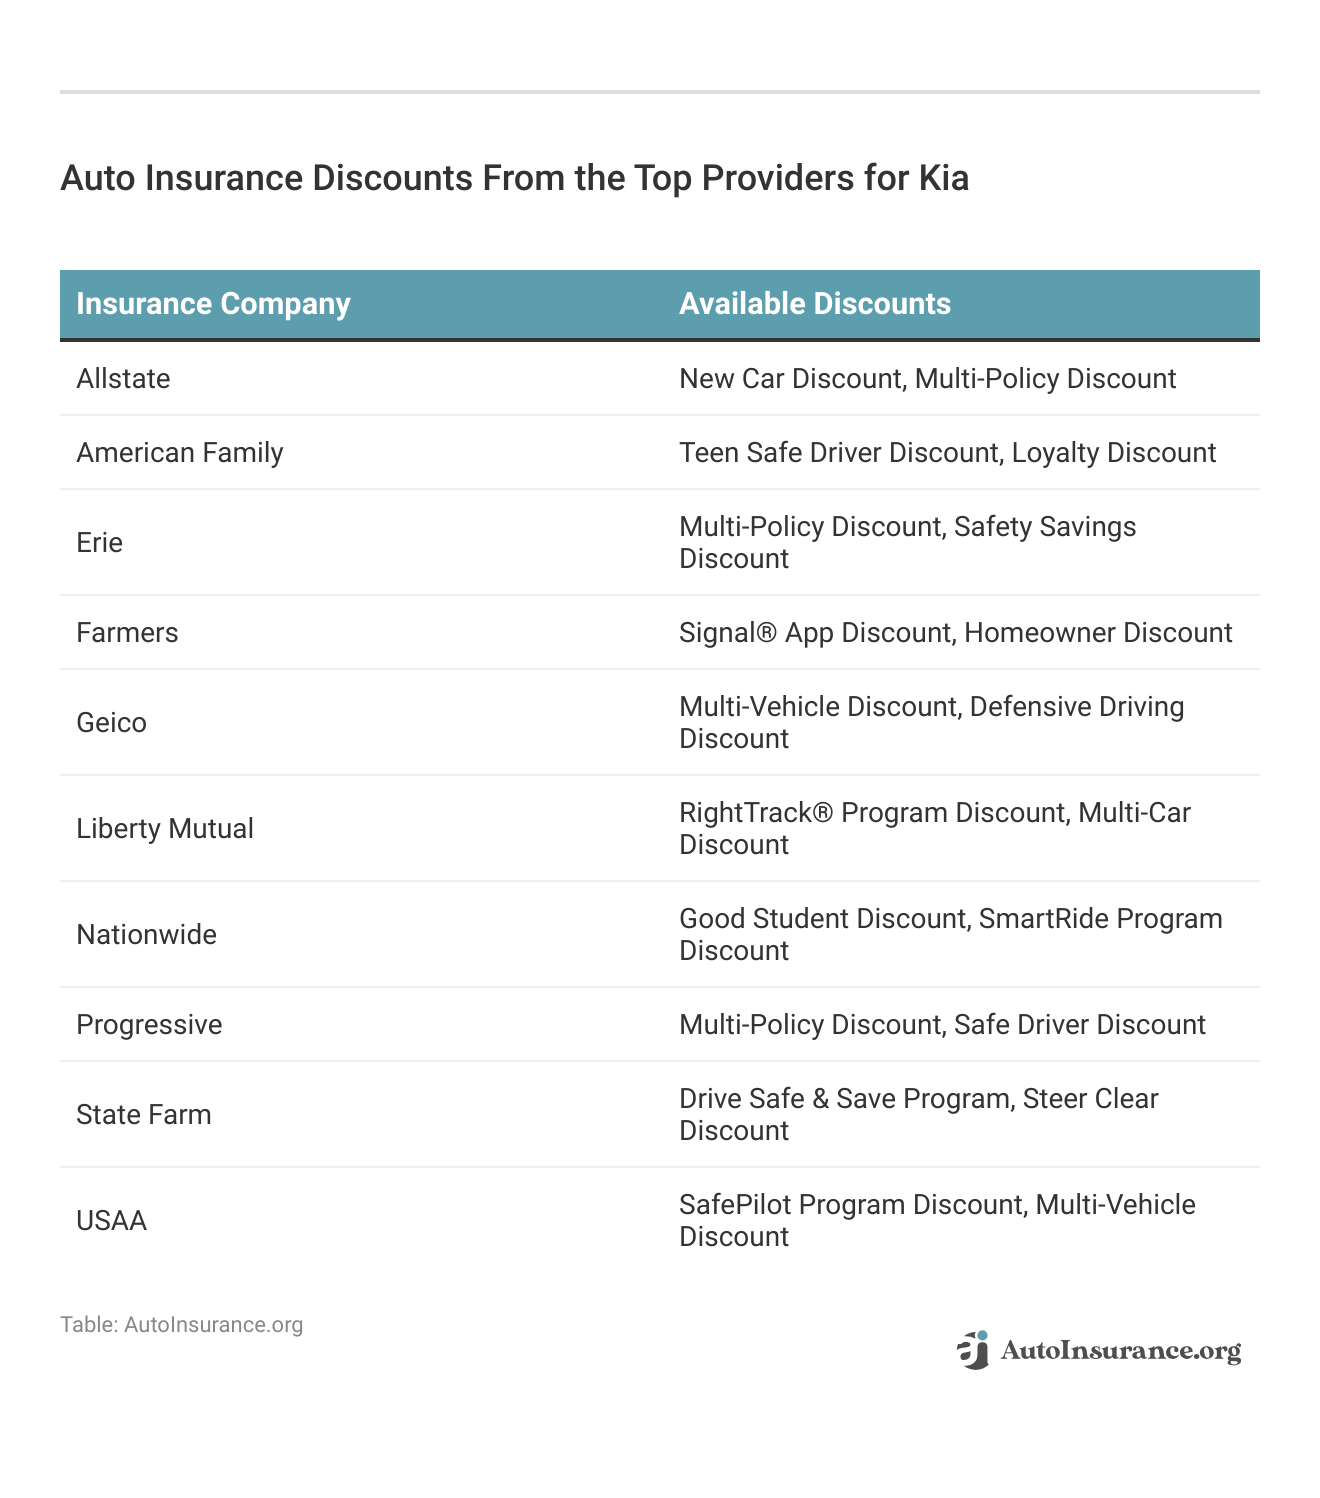 <h3>Auto Insurance Discounts From the Top Providers for Kia</h3>